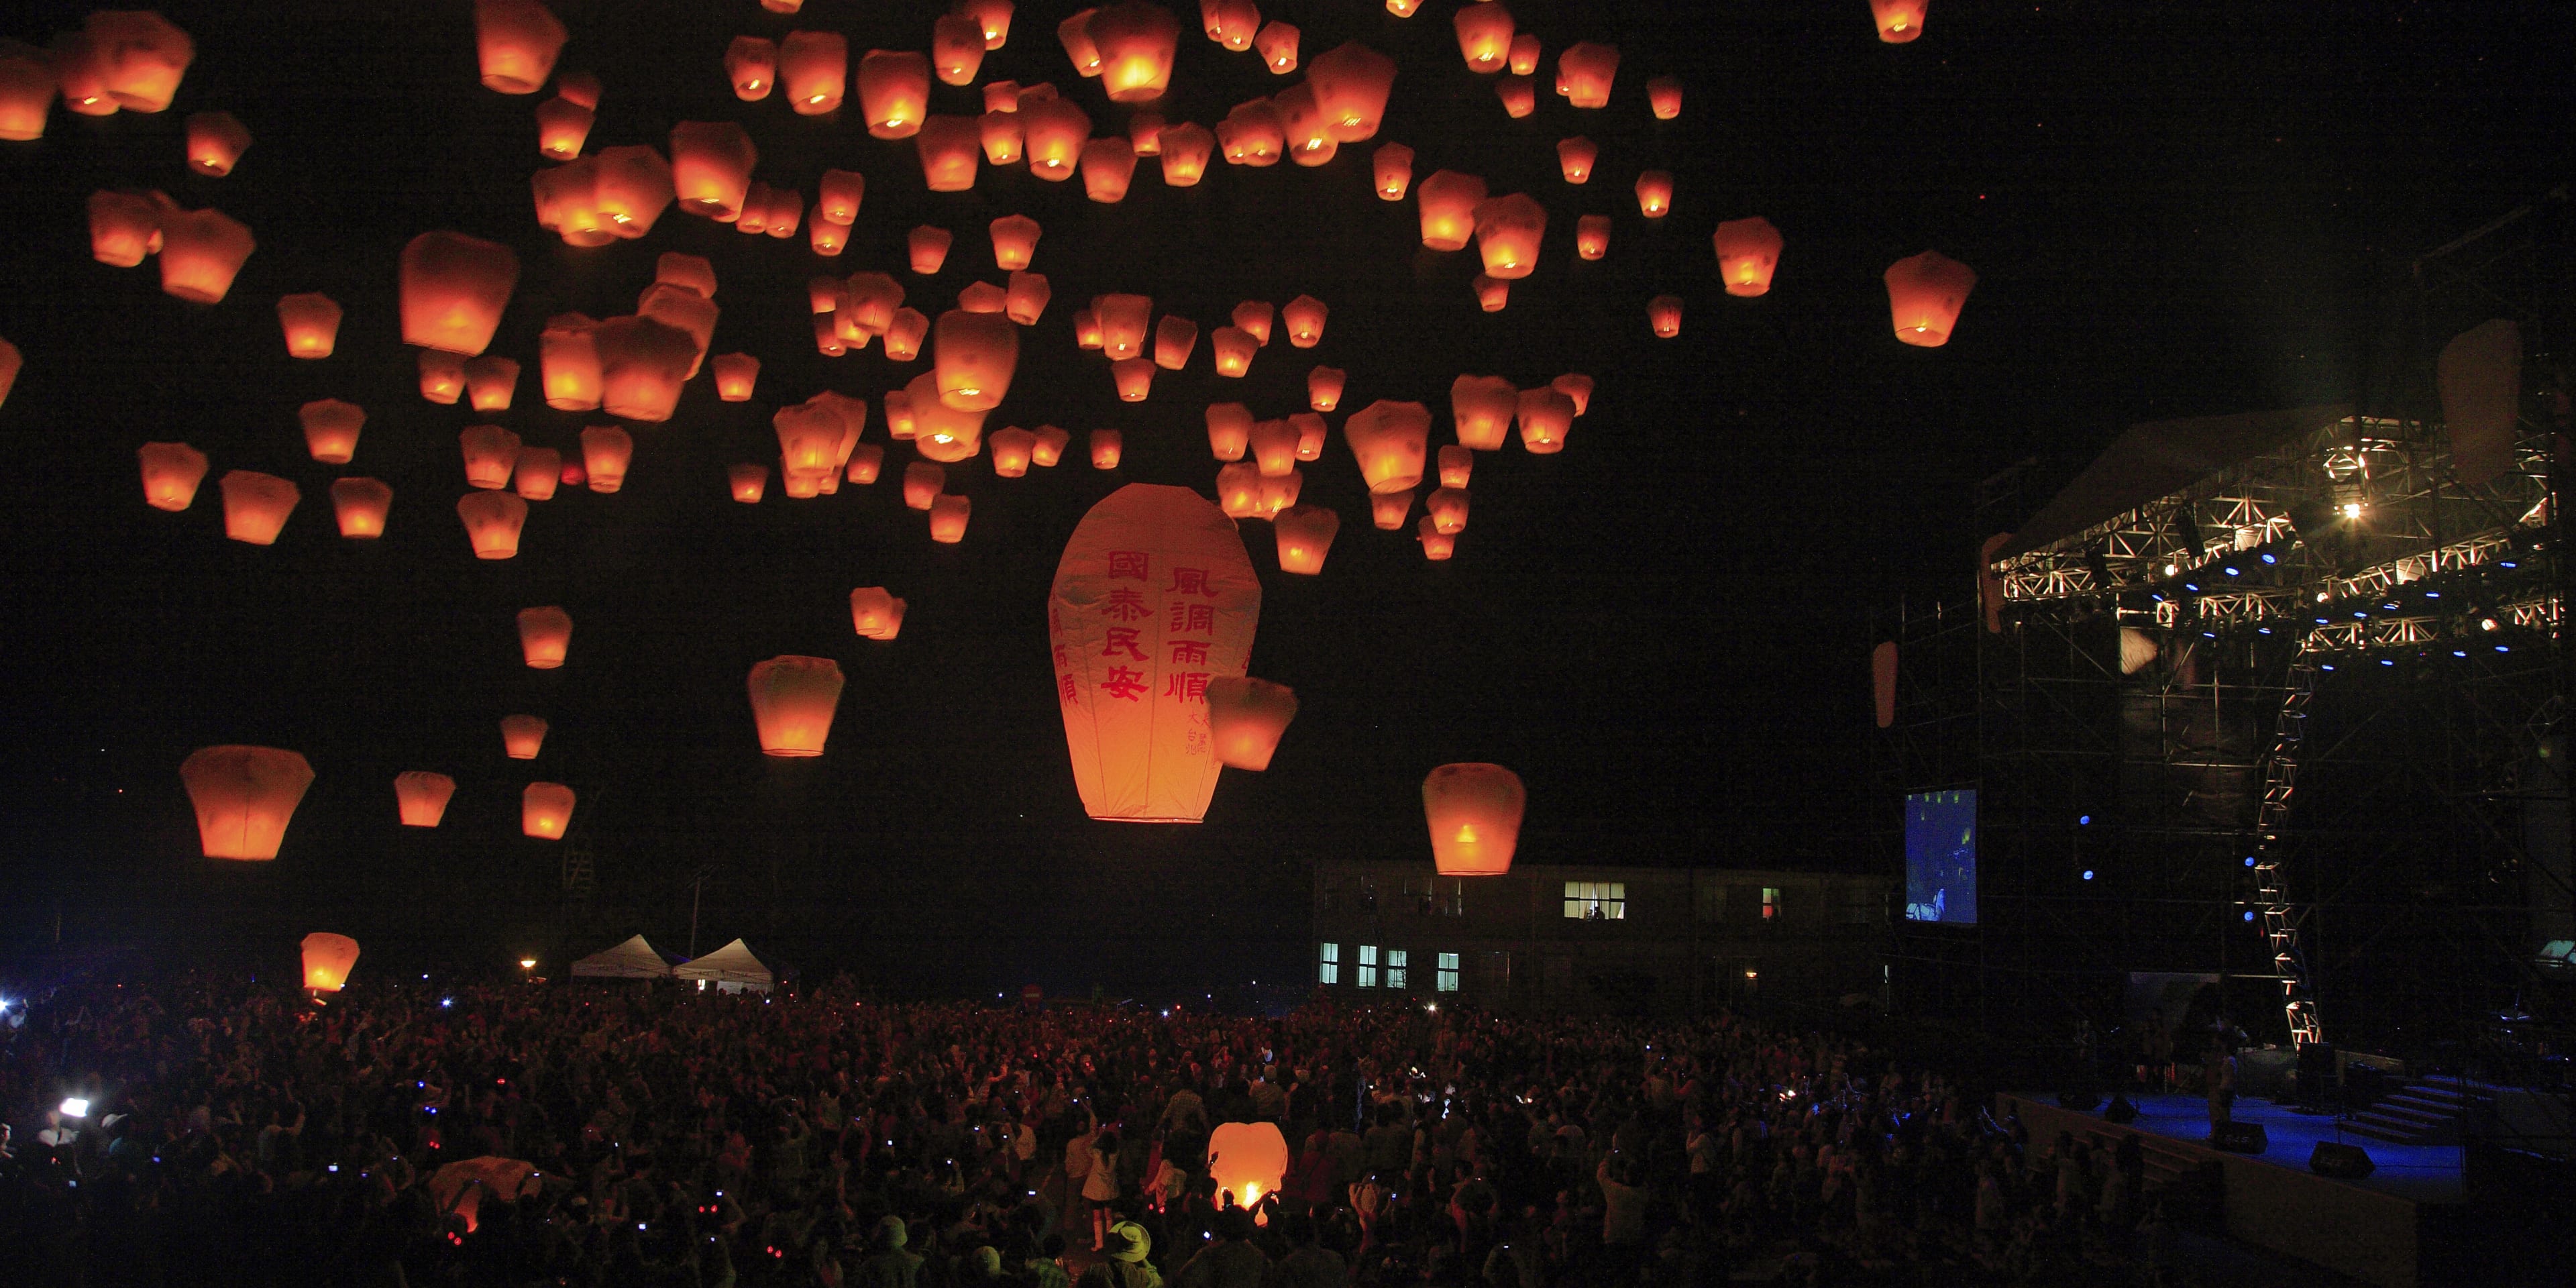 Lanterns flying into the sky at night at the Pingxi Sky Lantern Festival in Taiwan